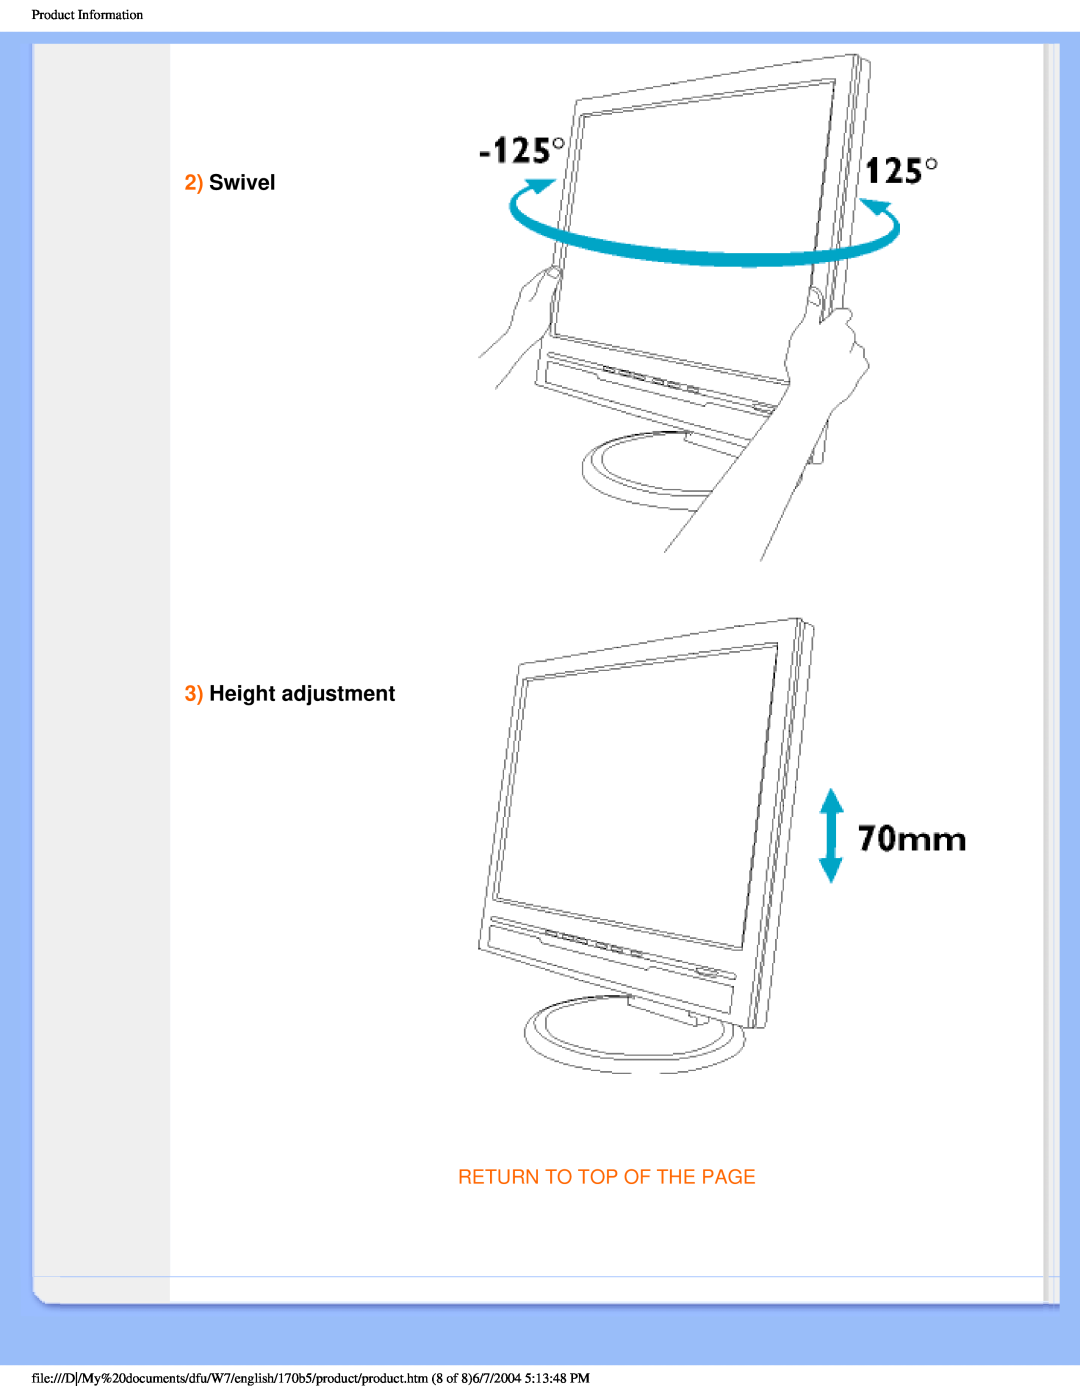 Philips 170B5 user manual 2Swivel 3Height adjustment, Return To Top Of The Page, Product Information 